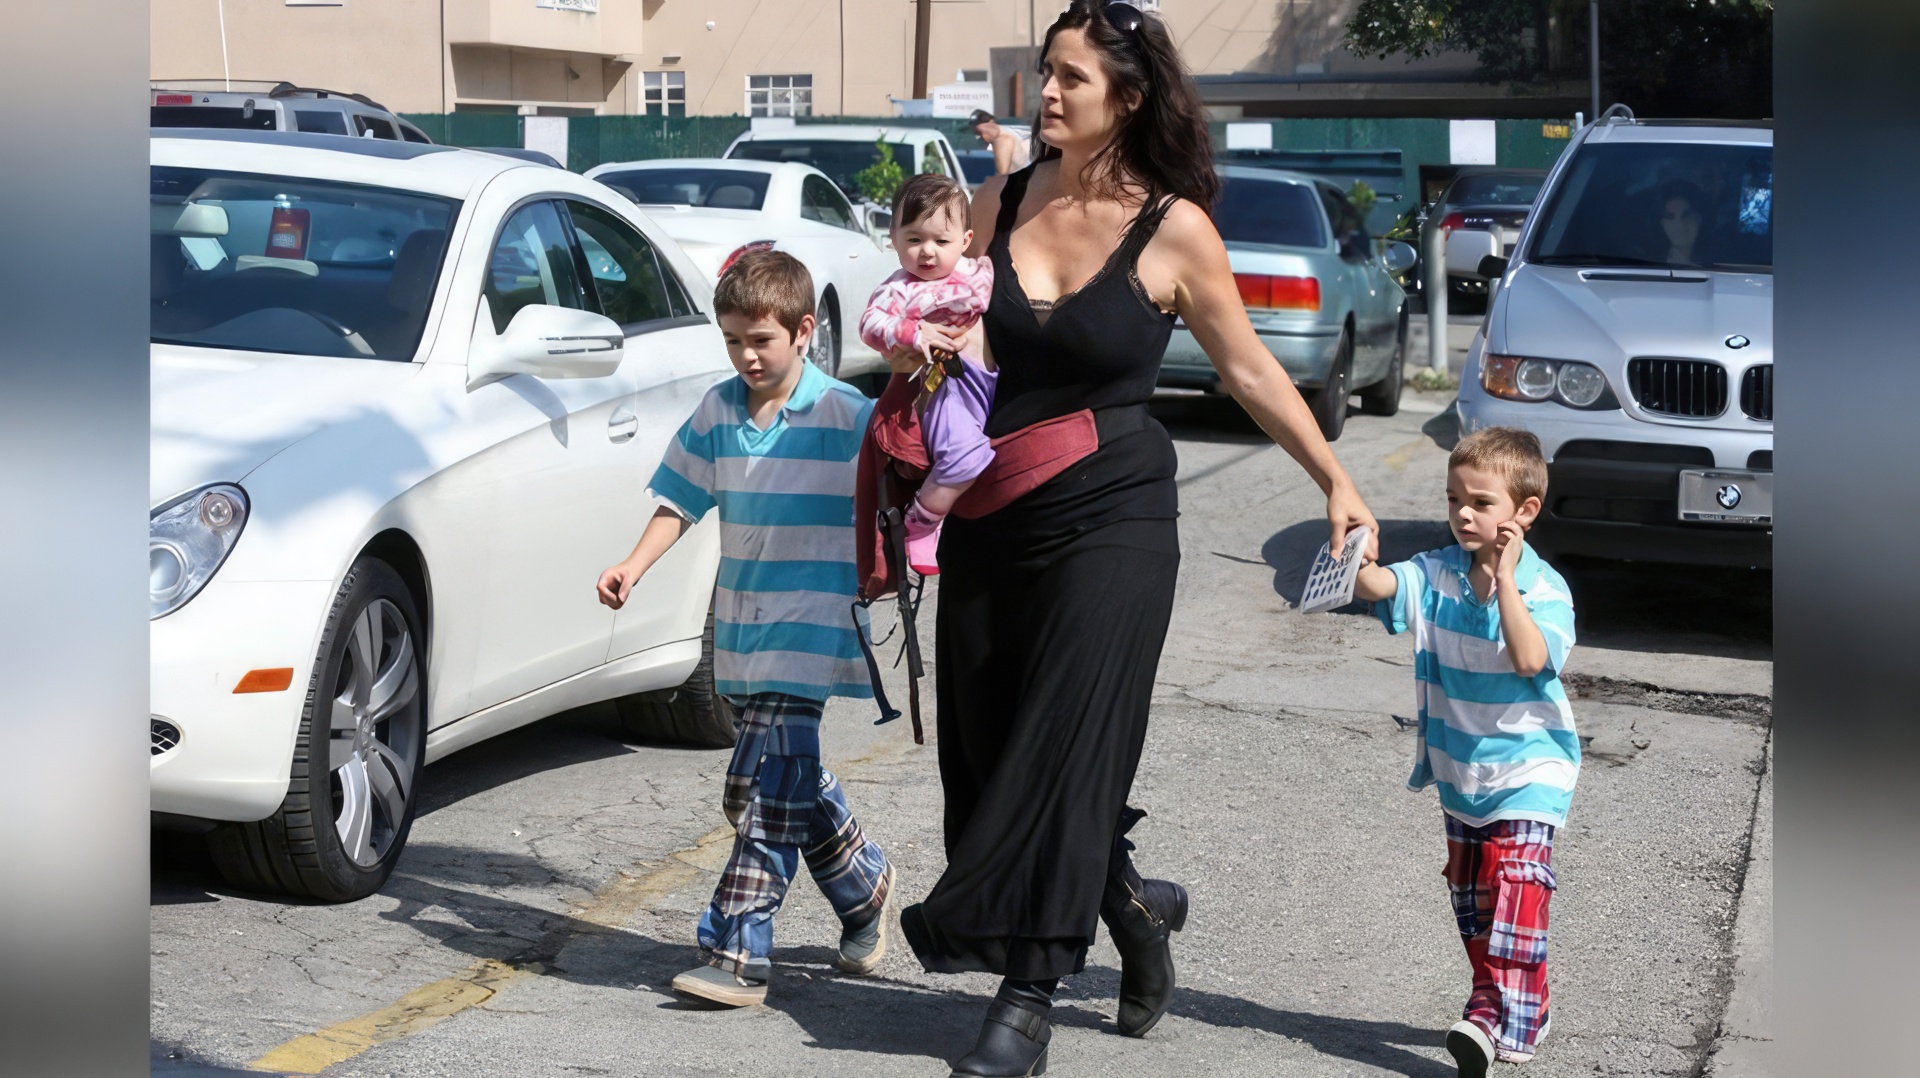 Carrie-Anne Moss with her children